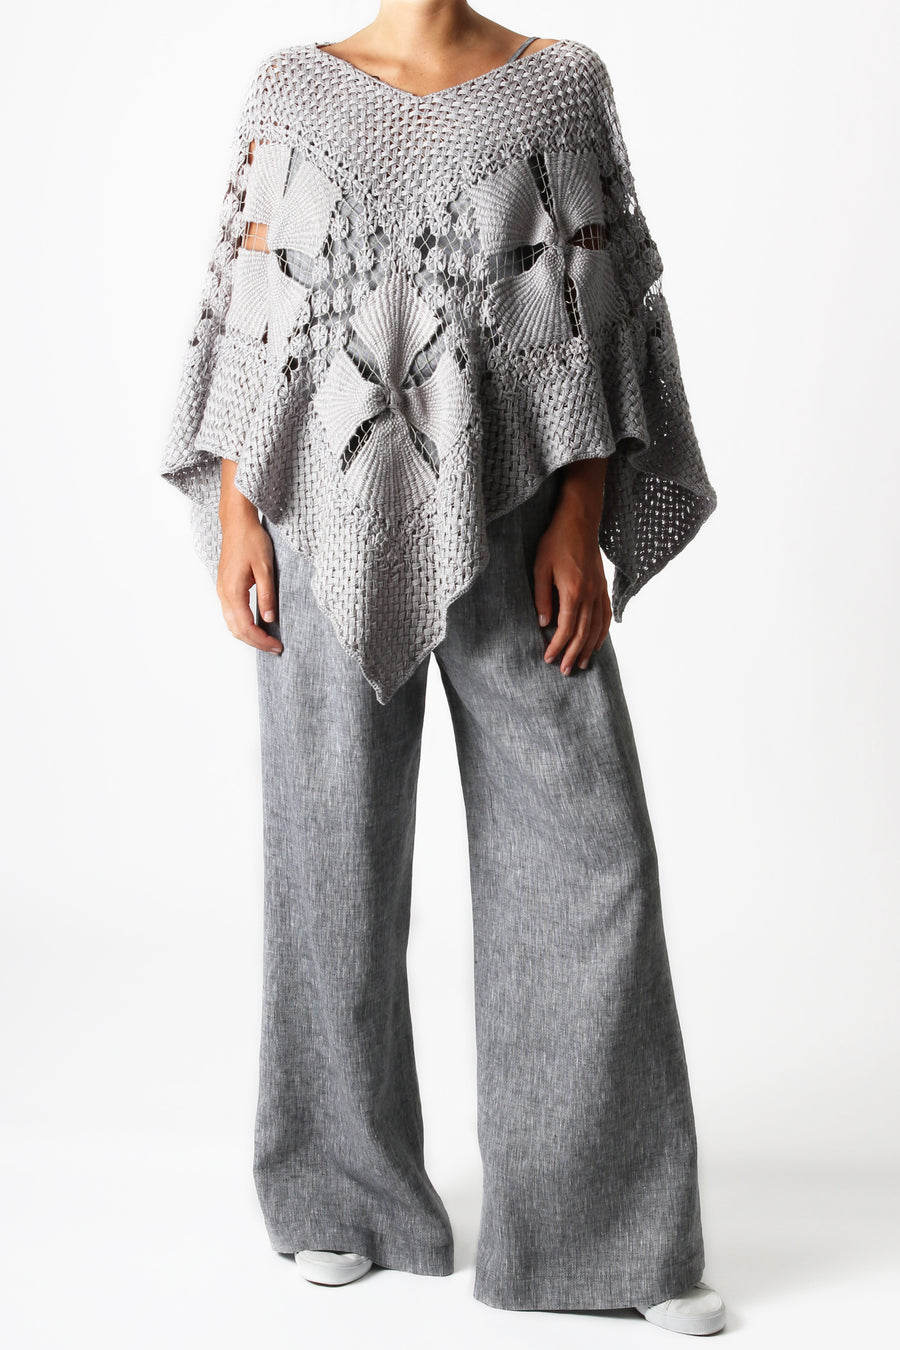 This is a photo of a woman wearing an all grey outfit with grey linen pants and a handmade grey knit shawl in the shape of a poncho.